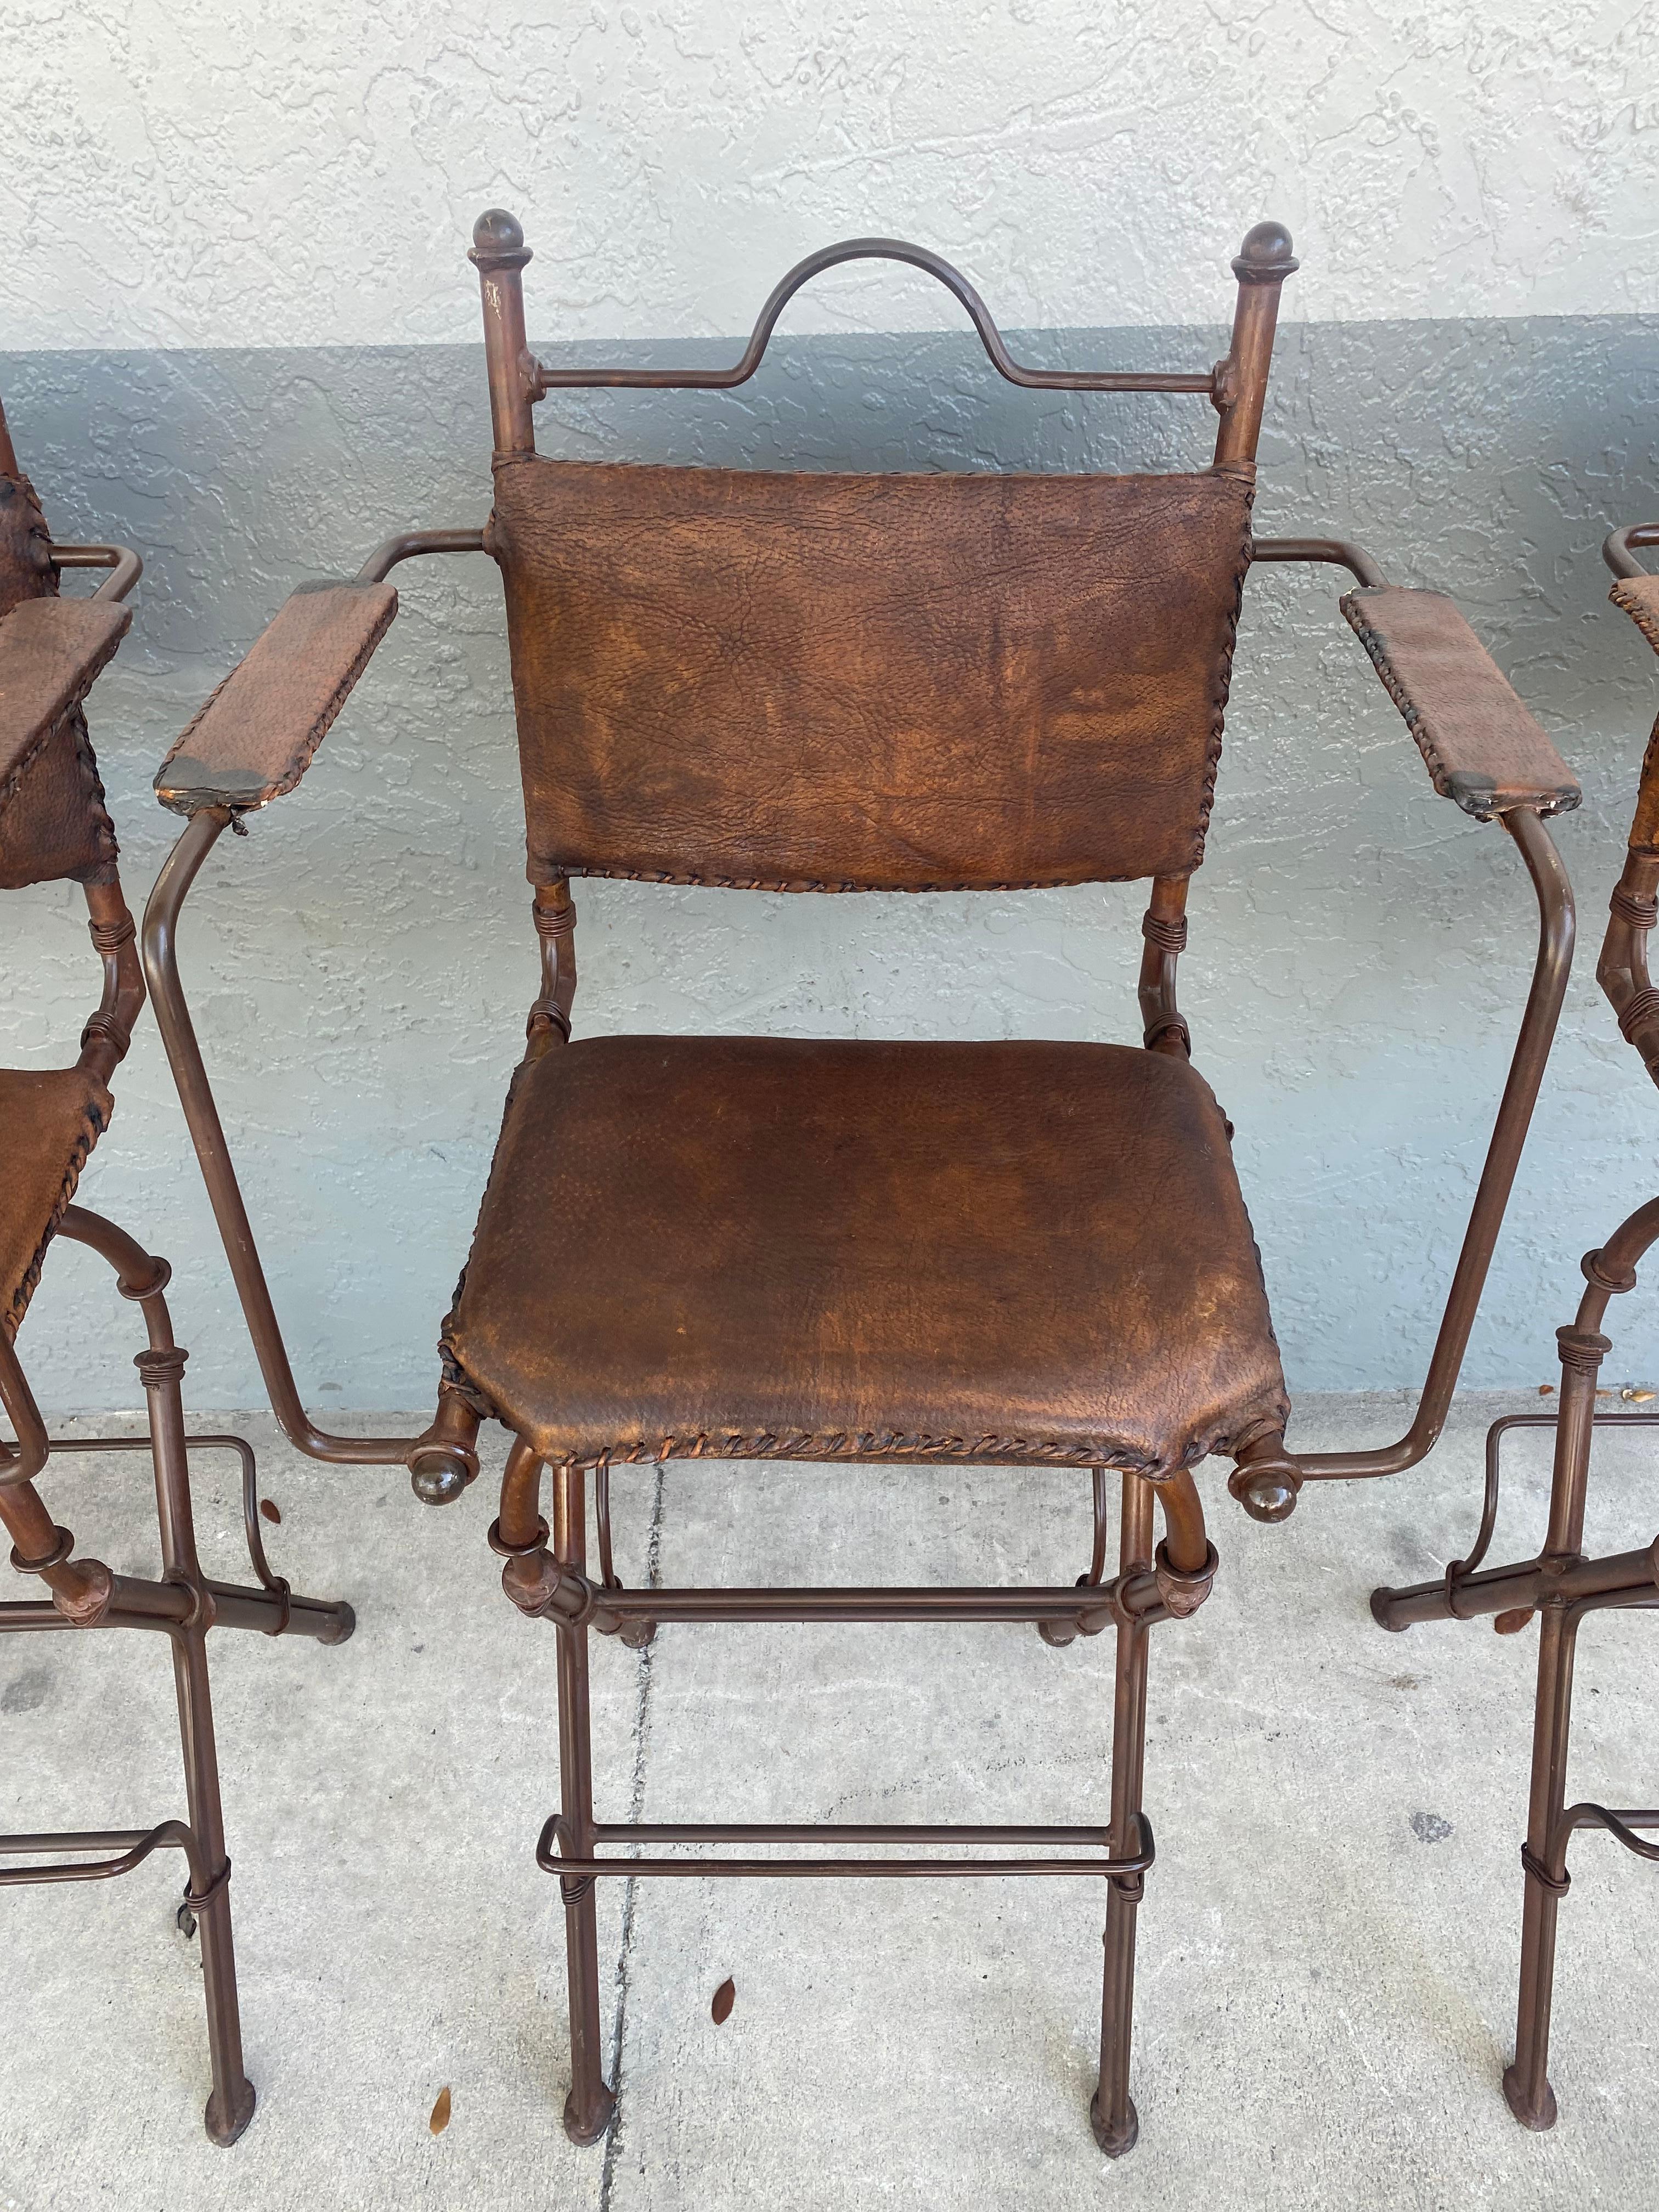 1940s Rustic Industrial Iron and Buffalo Leather Swivel Stools, Set of 4 For Sale 8